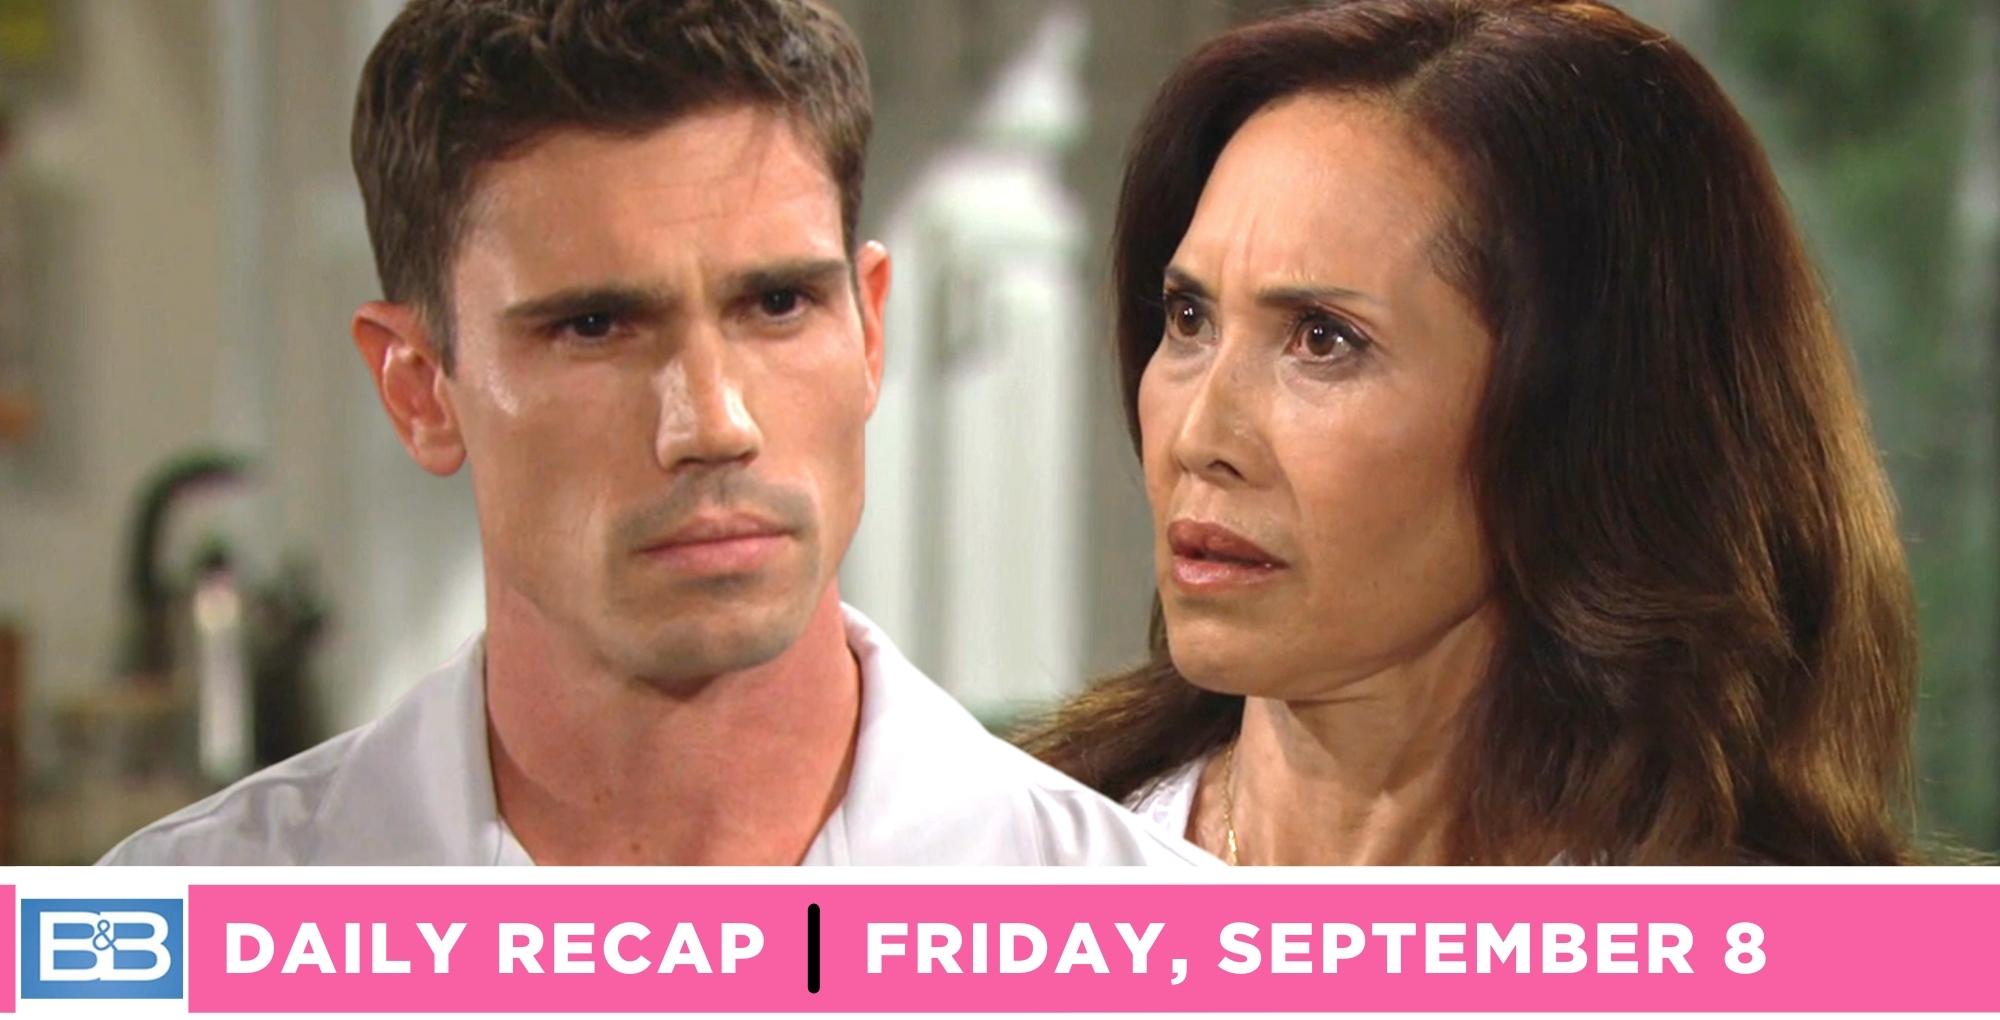 li finnegan heard the full truth from finn on the bold and the beautiful recap for friday, august 8, 2023.